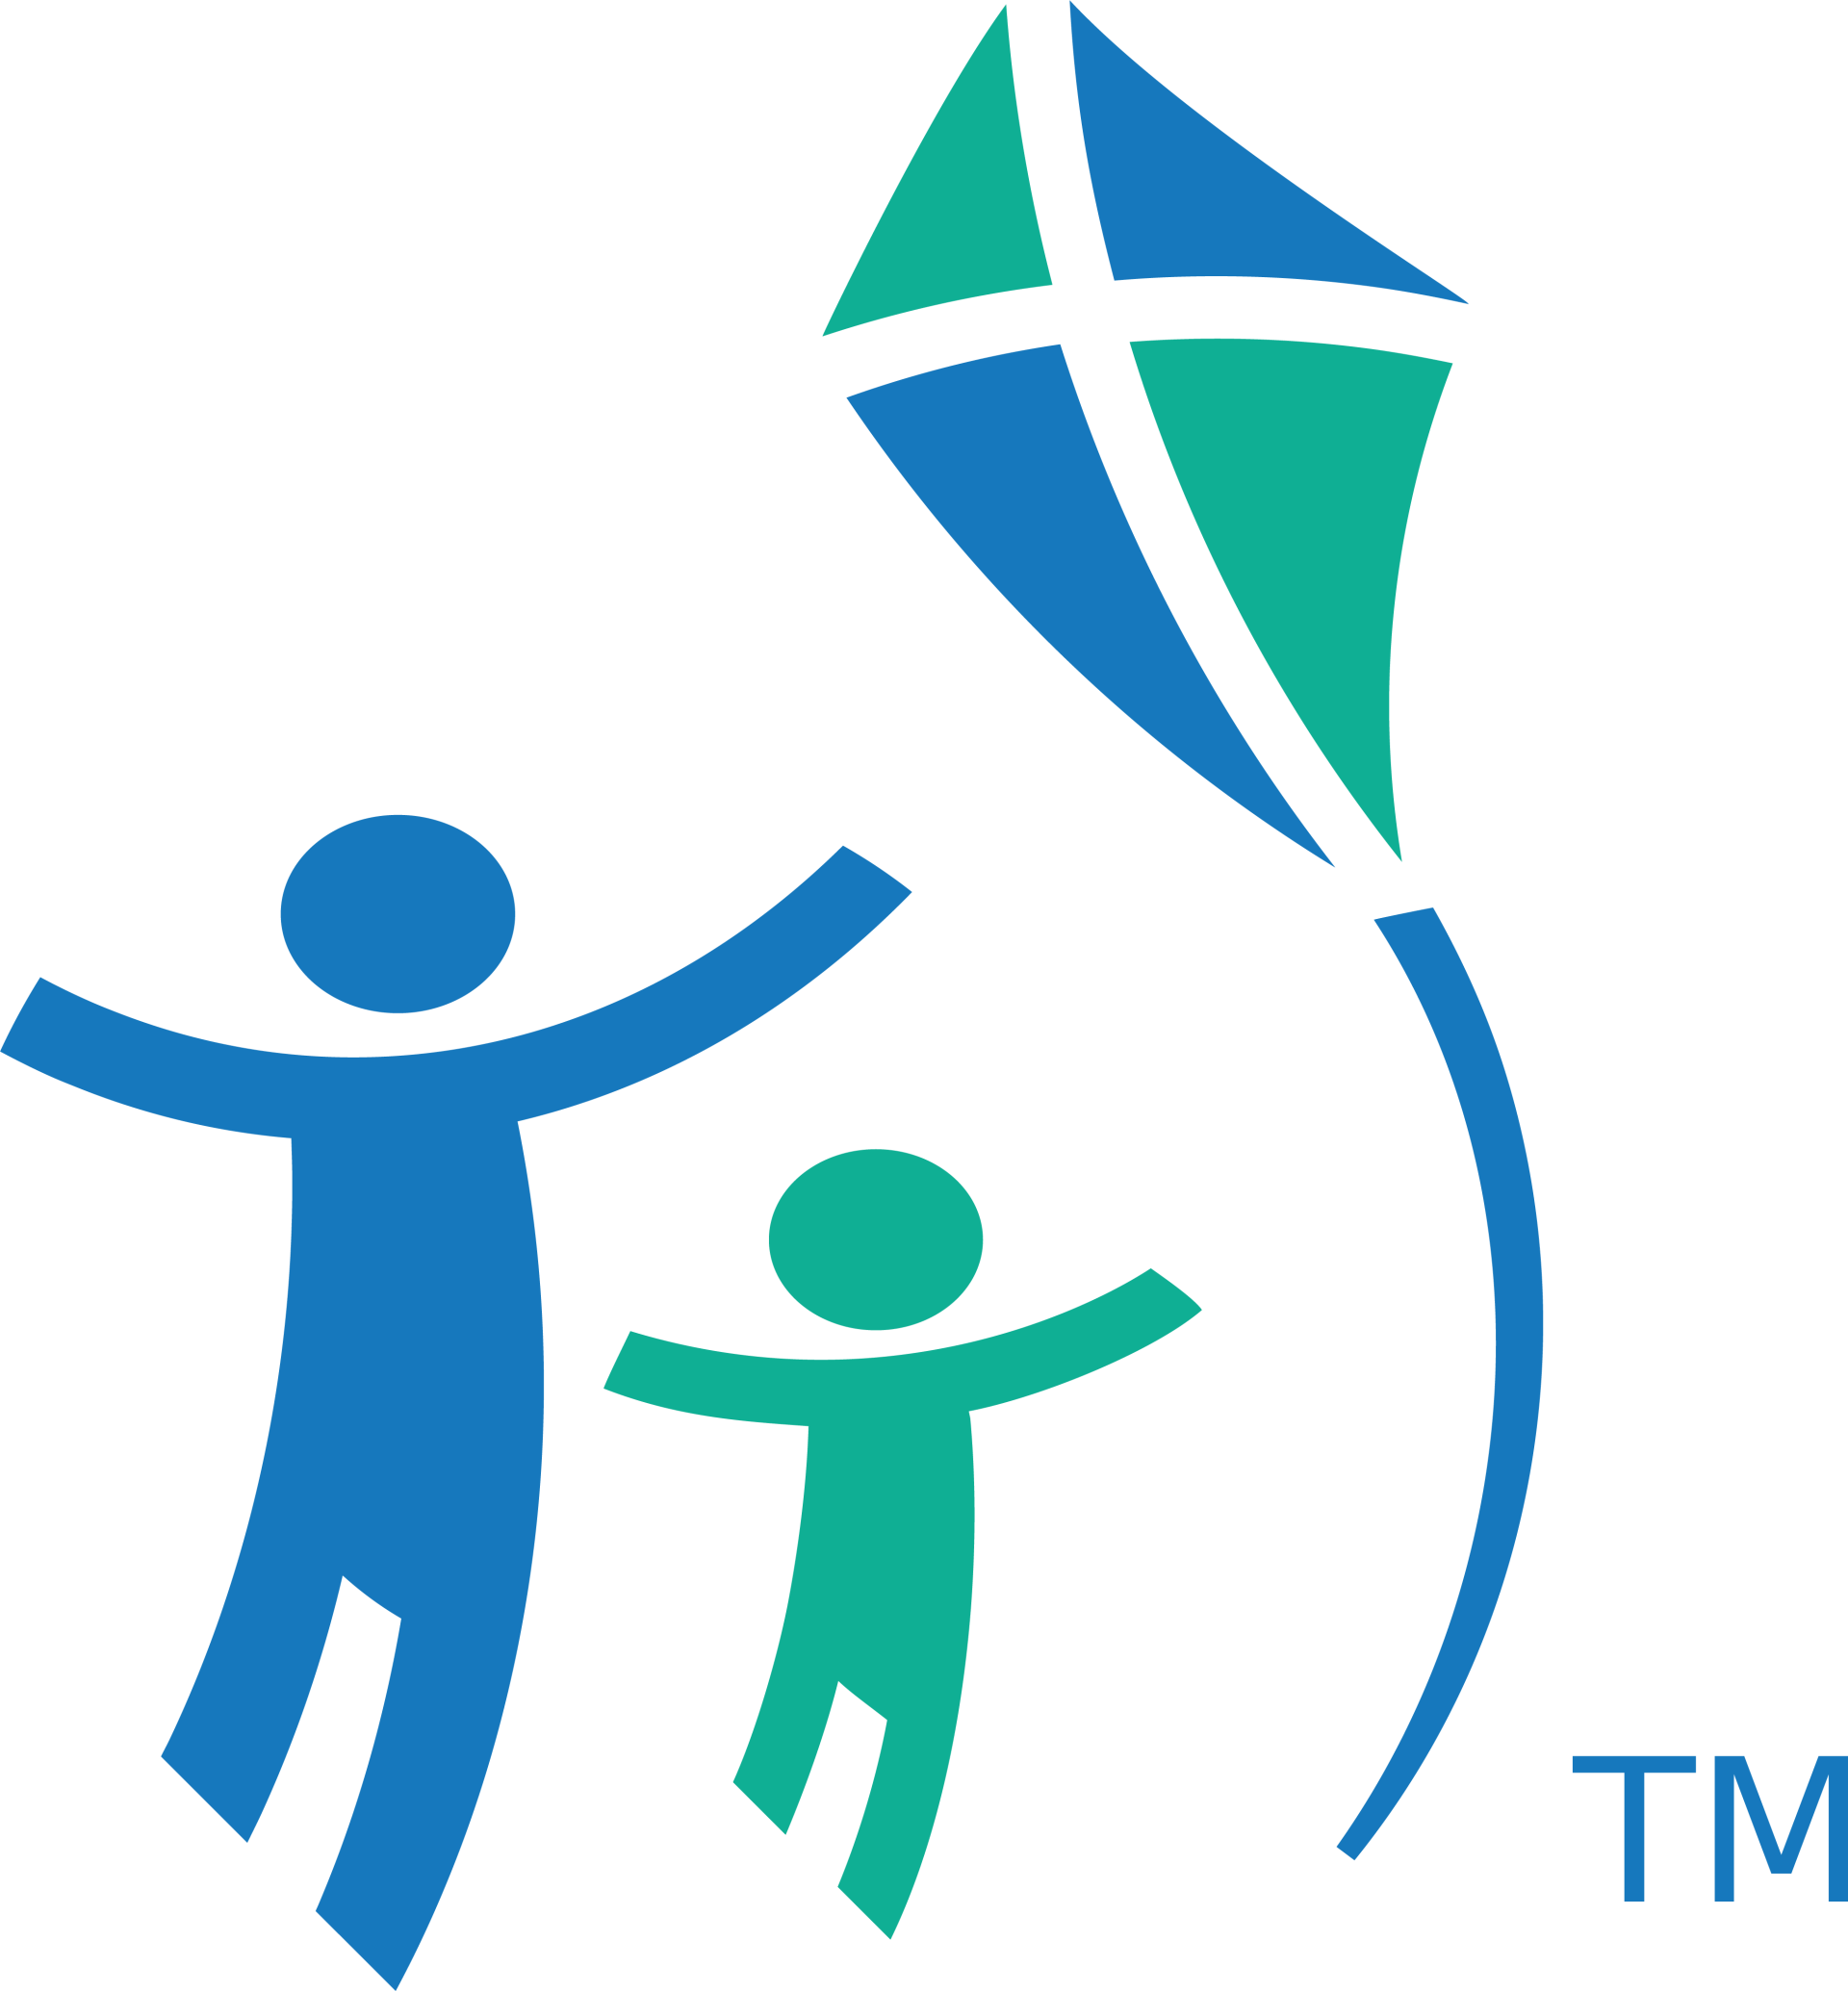 Cystic Fibrosis Canada graphic illustration of two people with kite